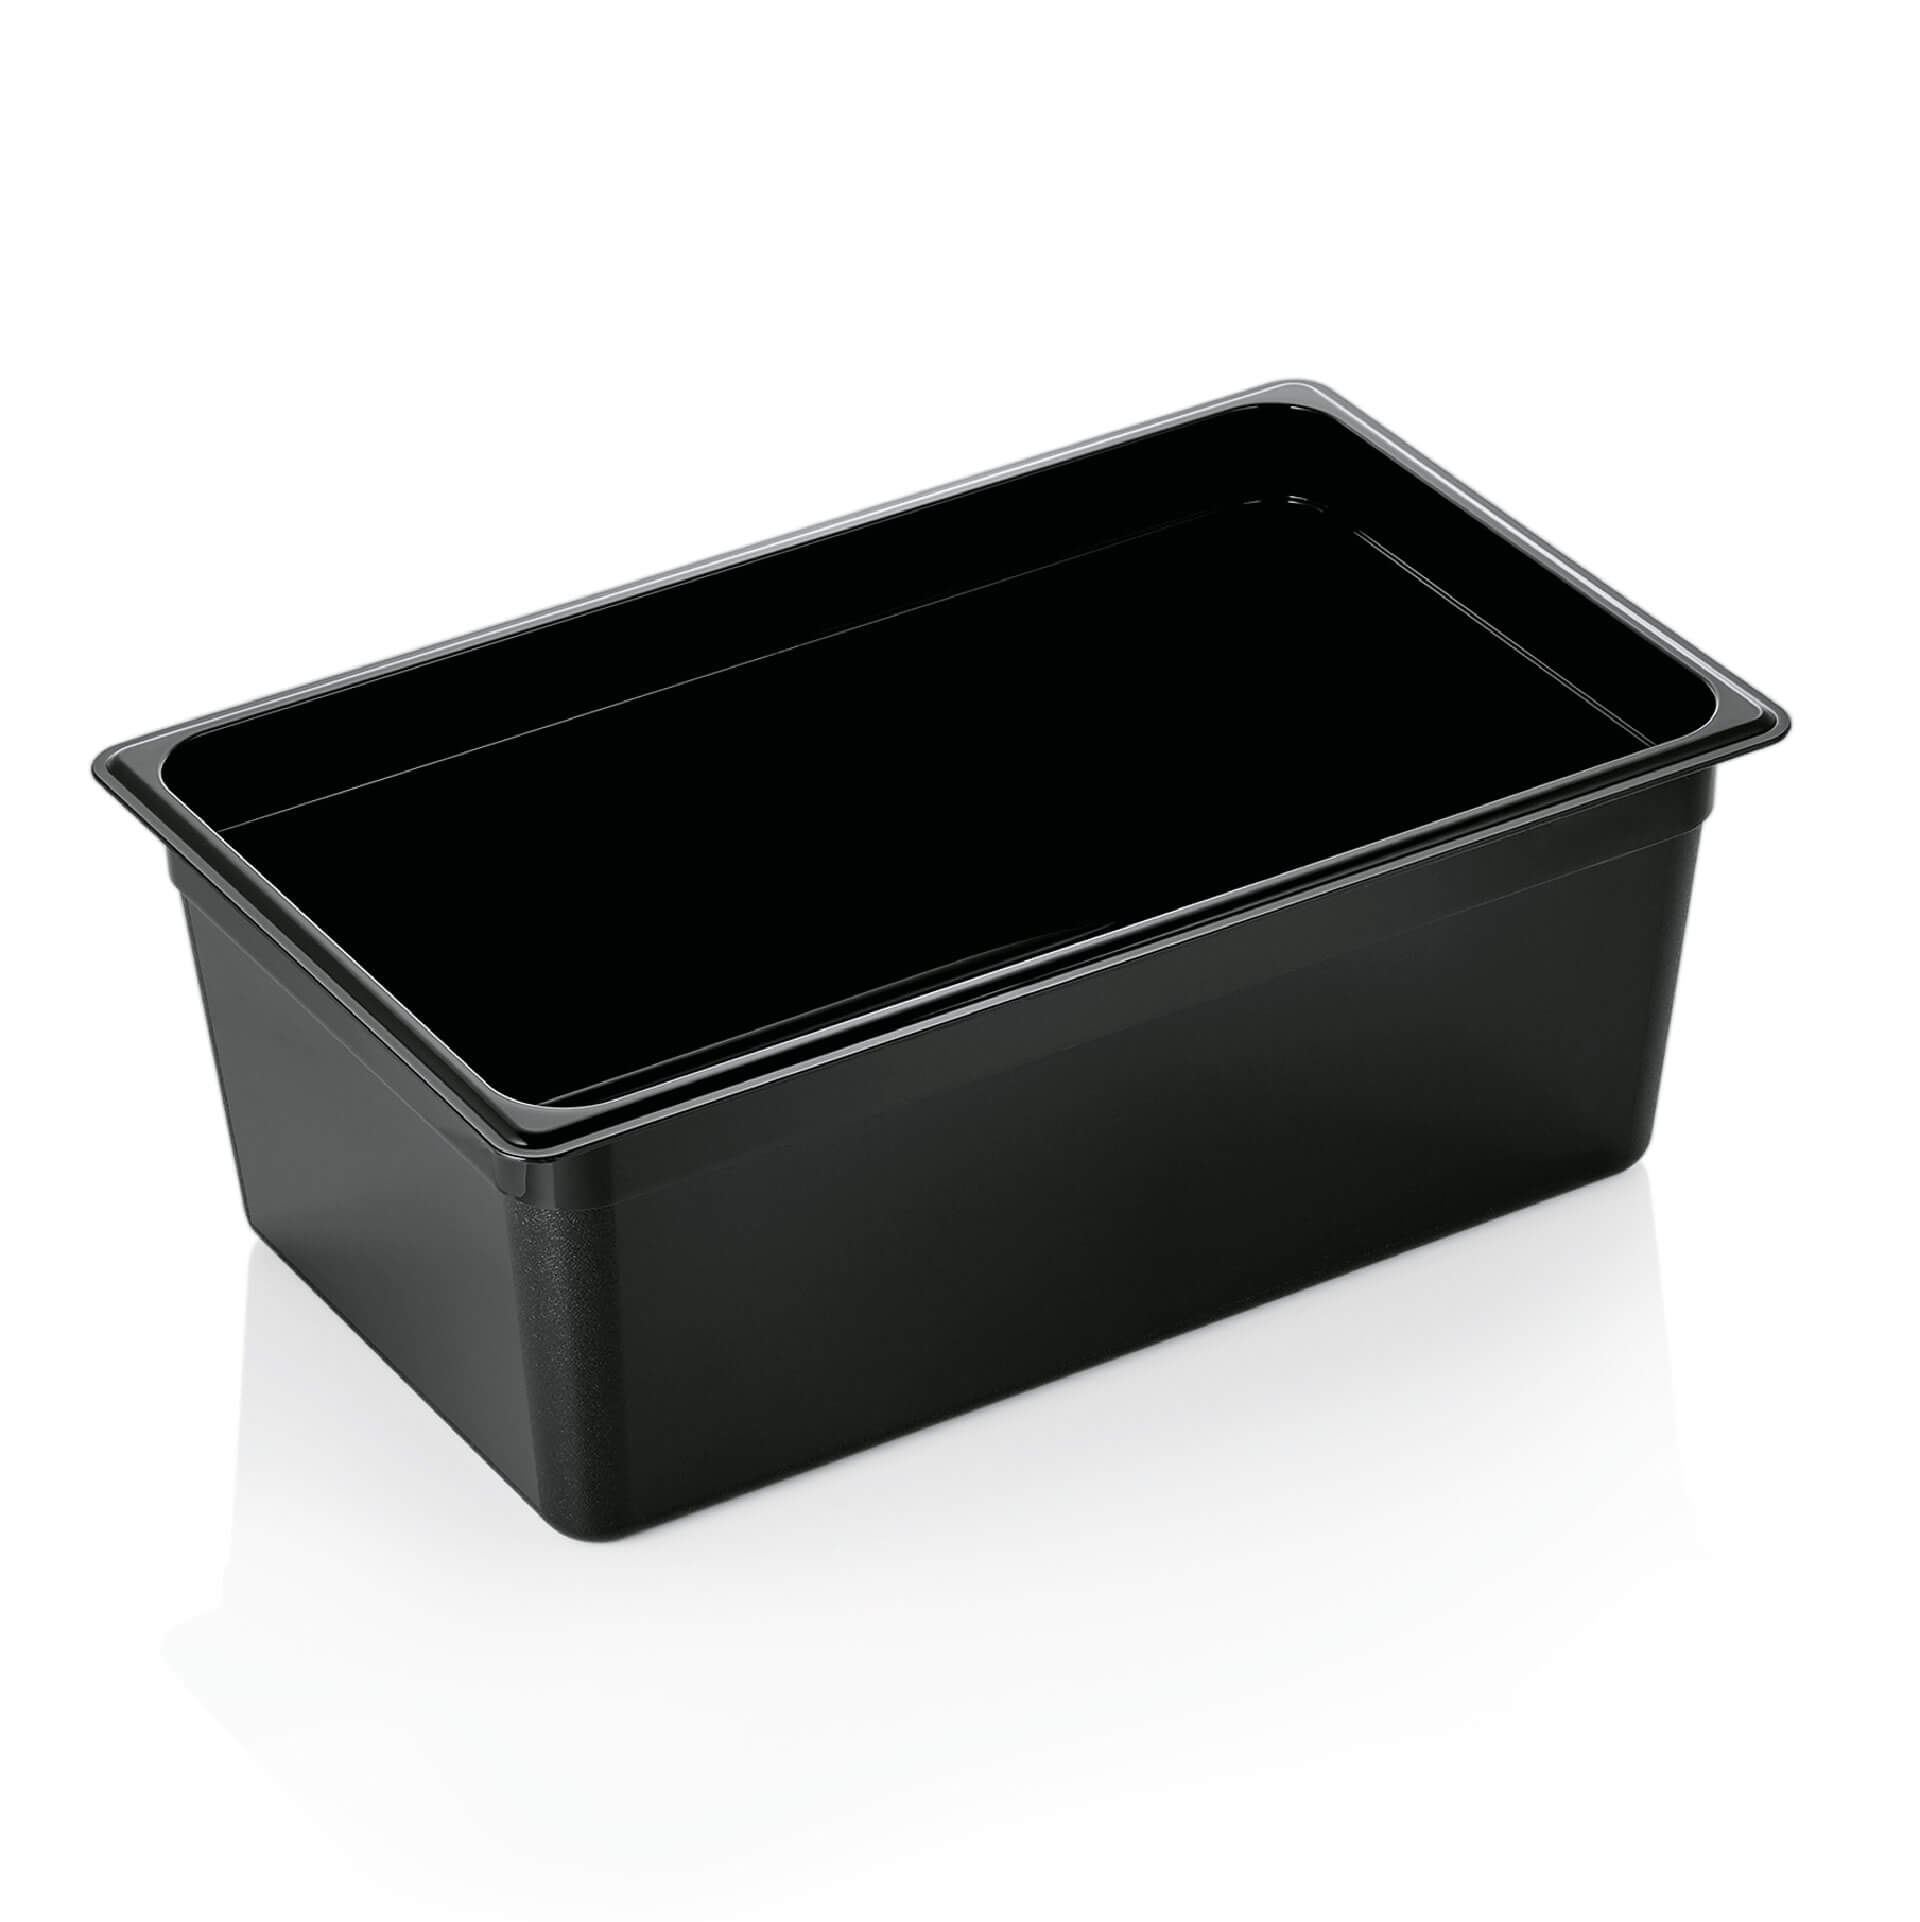 Gastronorm container 200mm depth - PC black (GN 1/1)